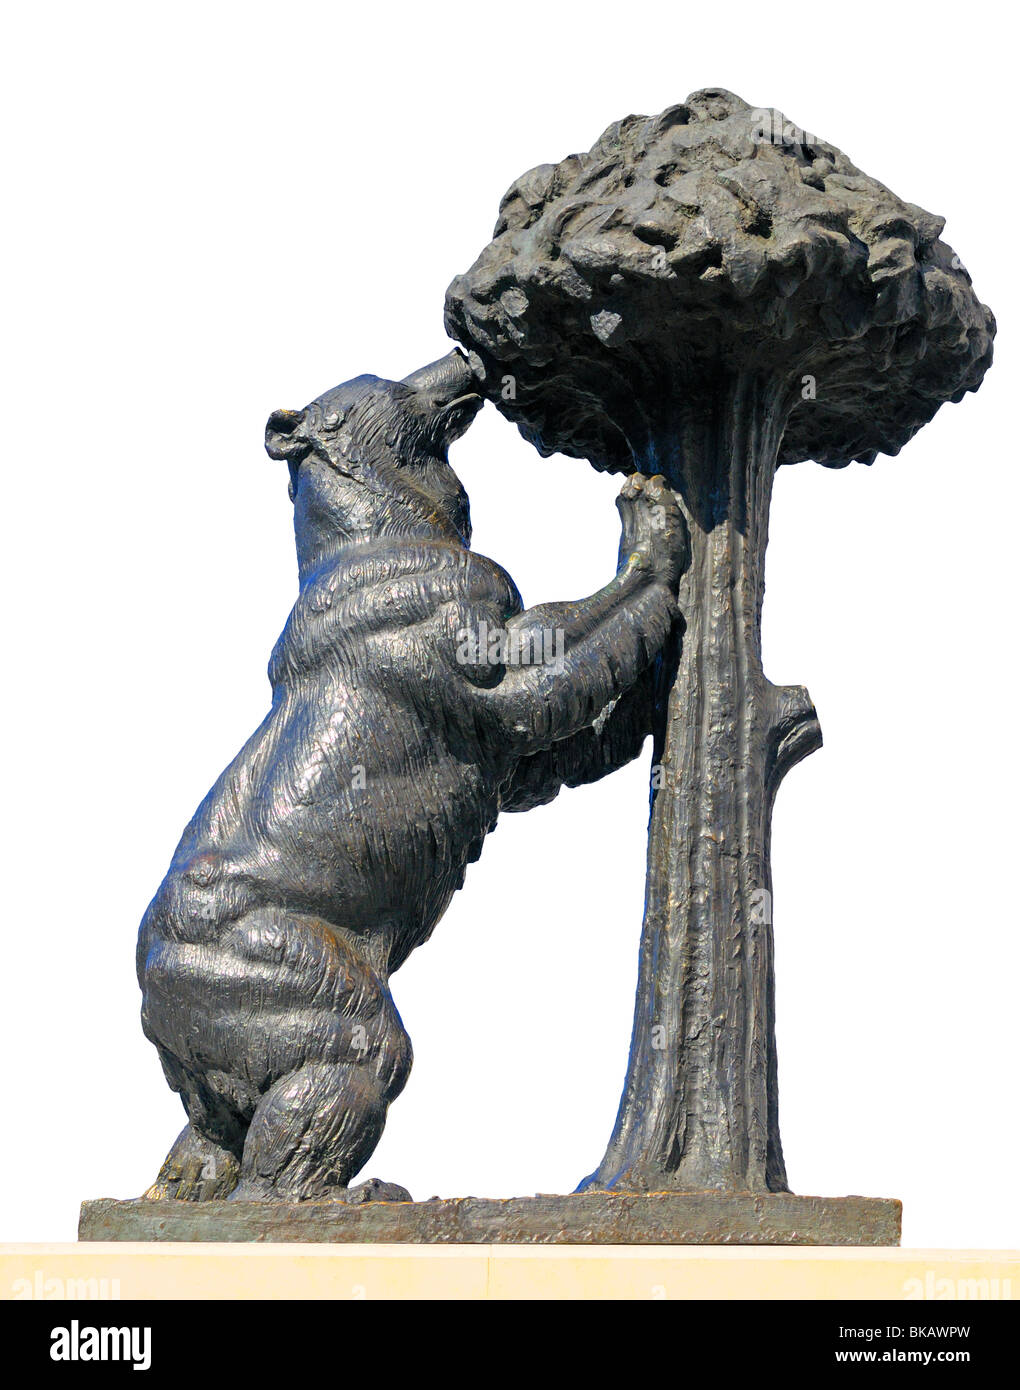 Madrid, Spain. Puerta del Sol. Bronze statue of the bear and the Madrono (arbutus) tree - symbol of Madrid Stock Photo